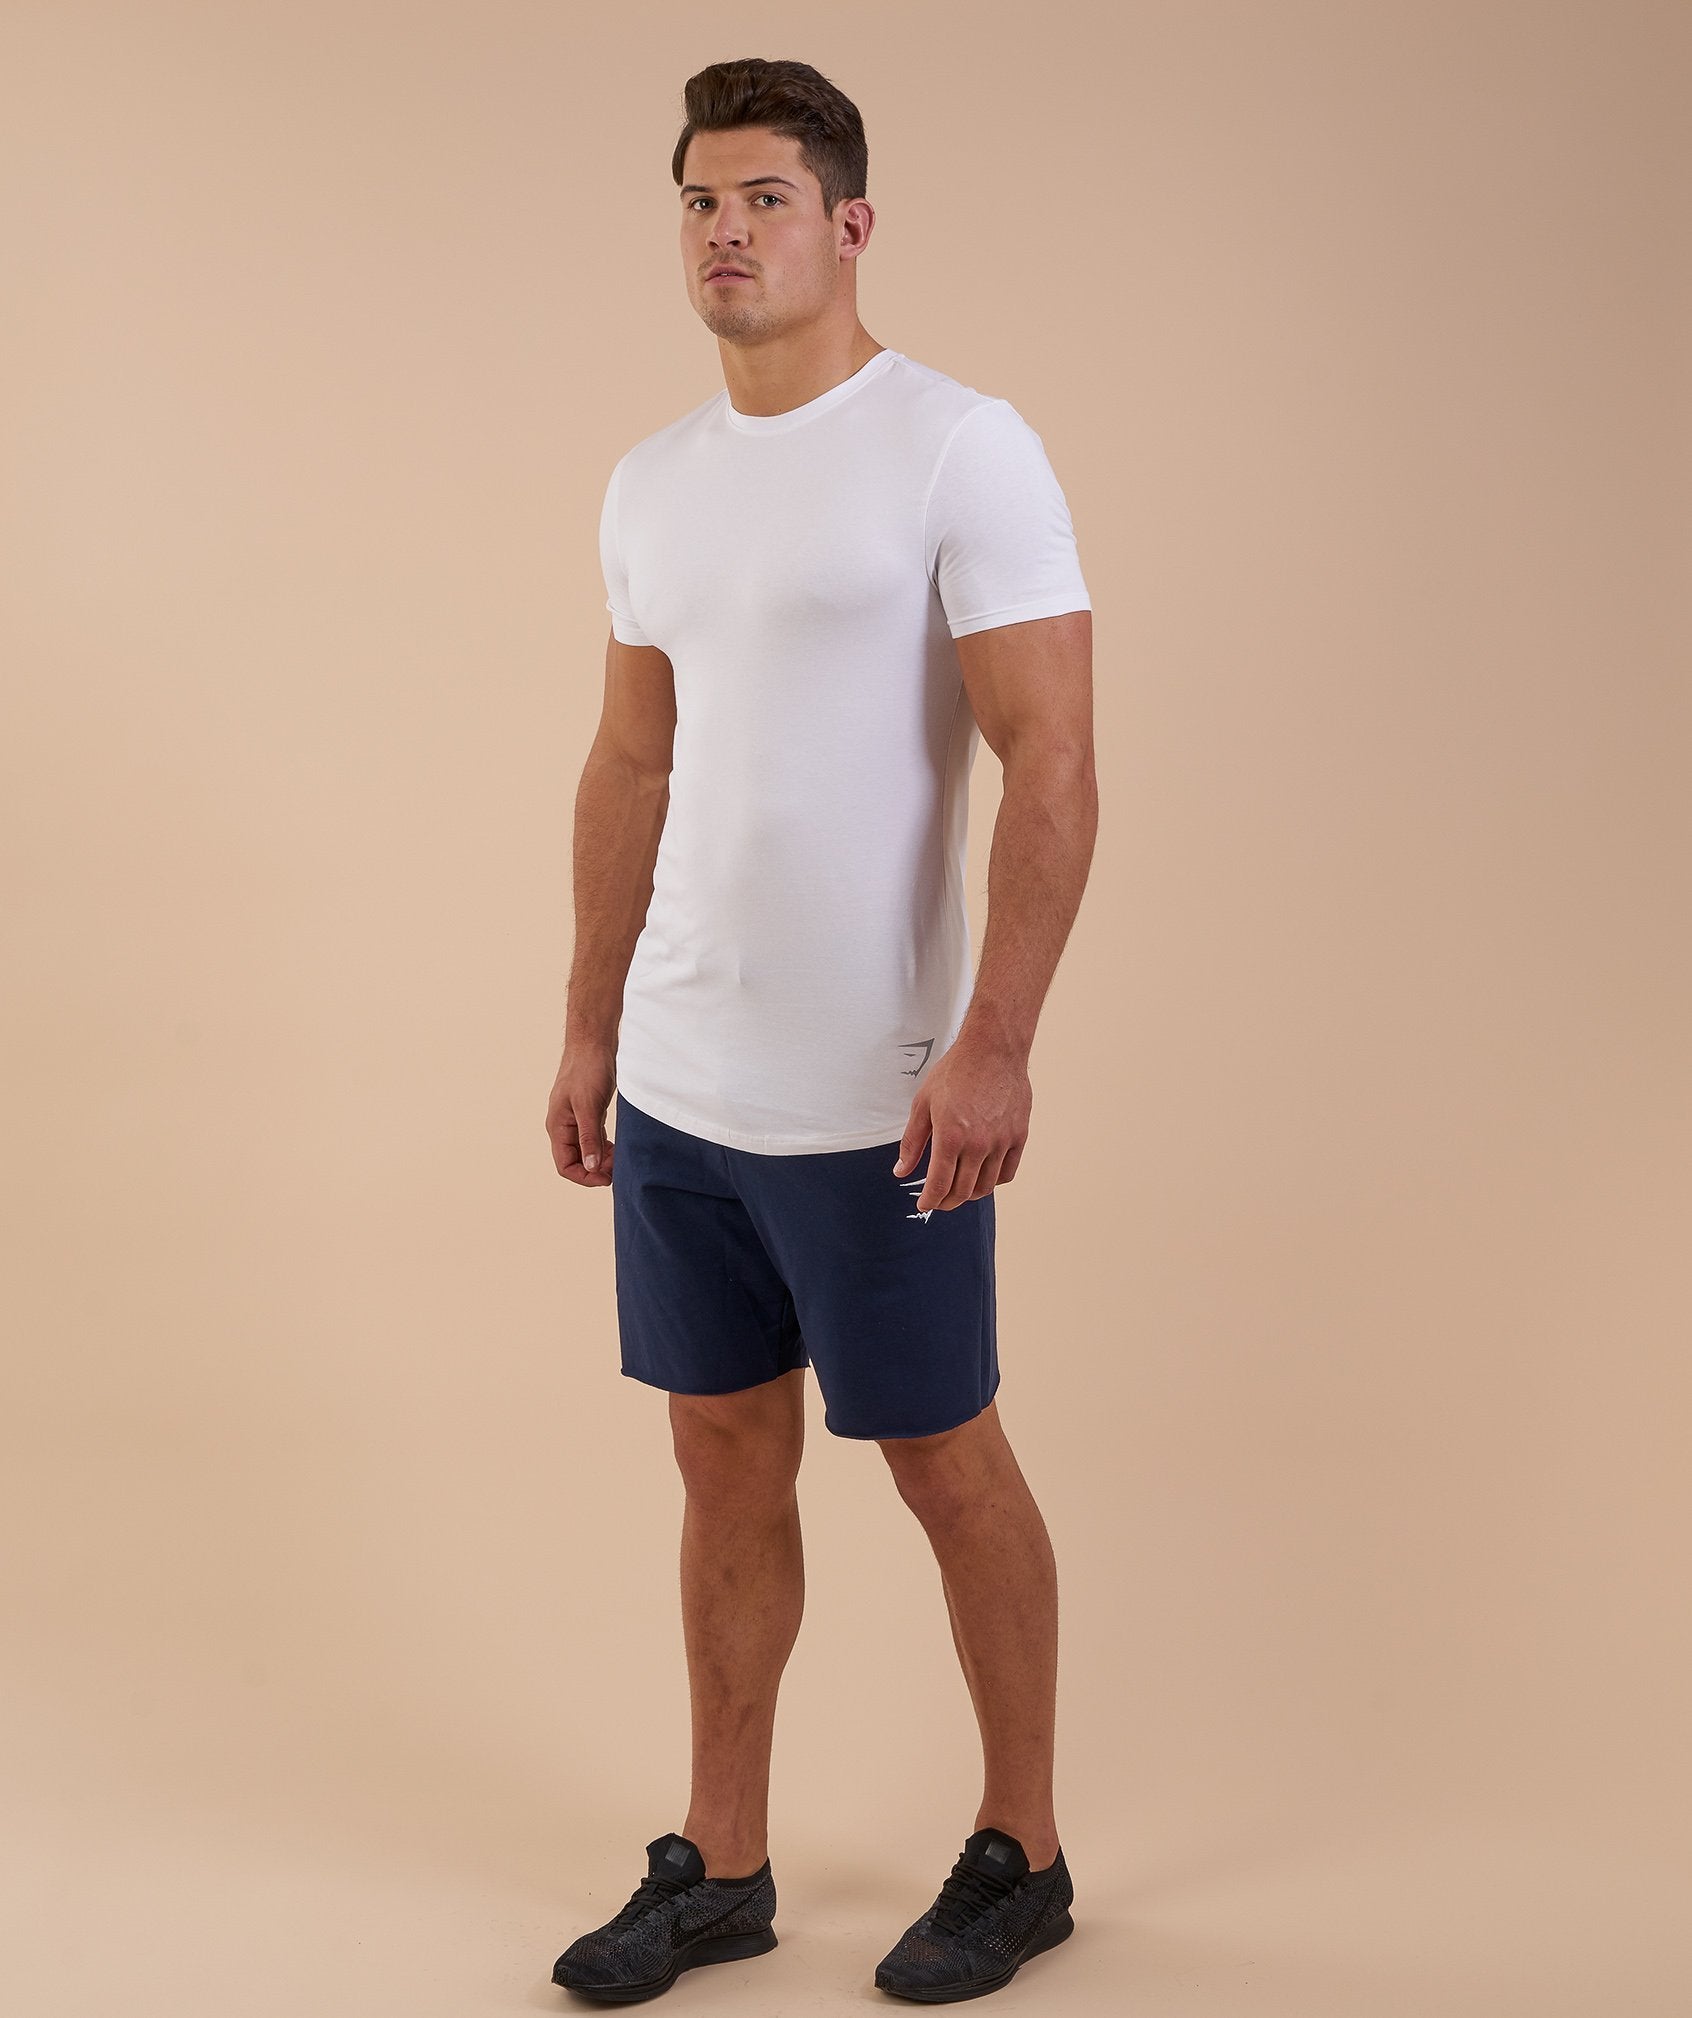 Solace Longline T-Shirt in White - view 2